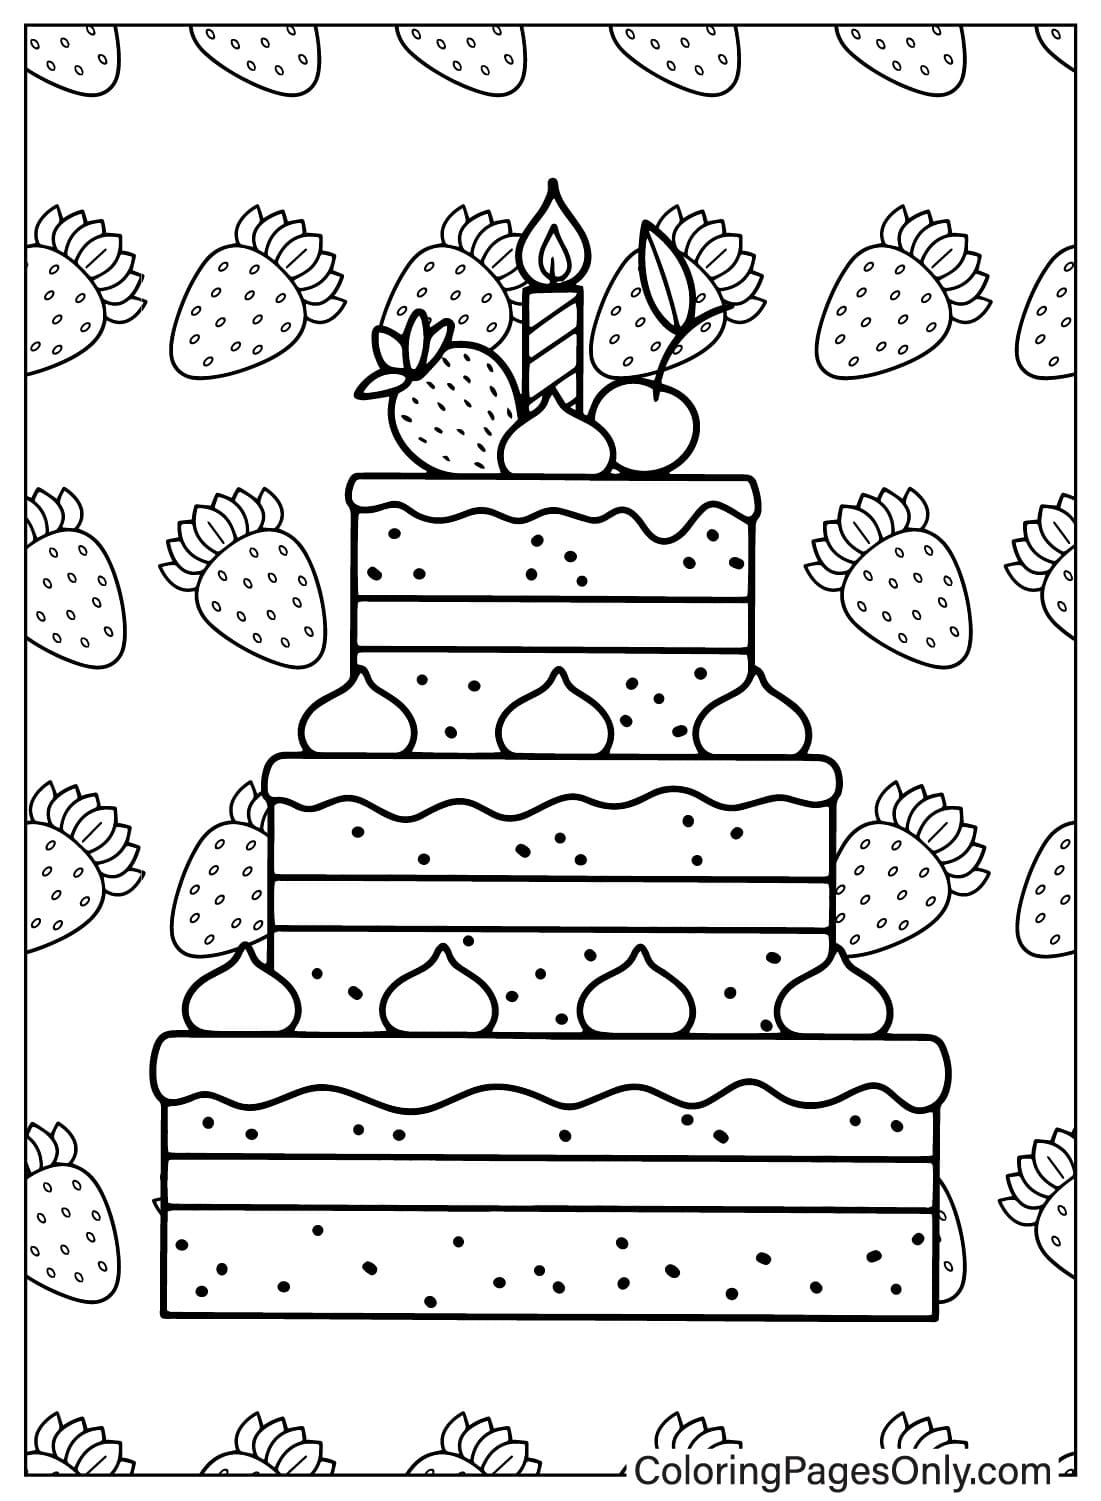 Birthday Cake Coloring Page to Print from Birthday Cake